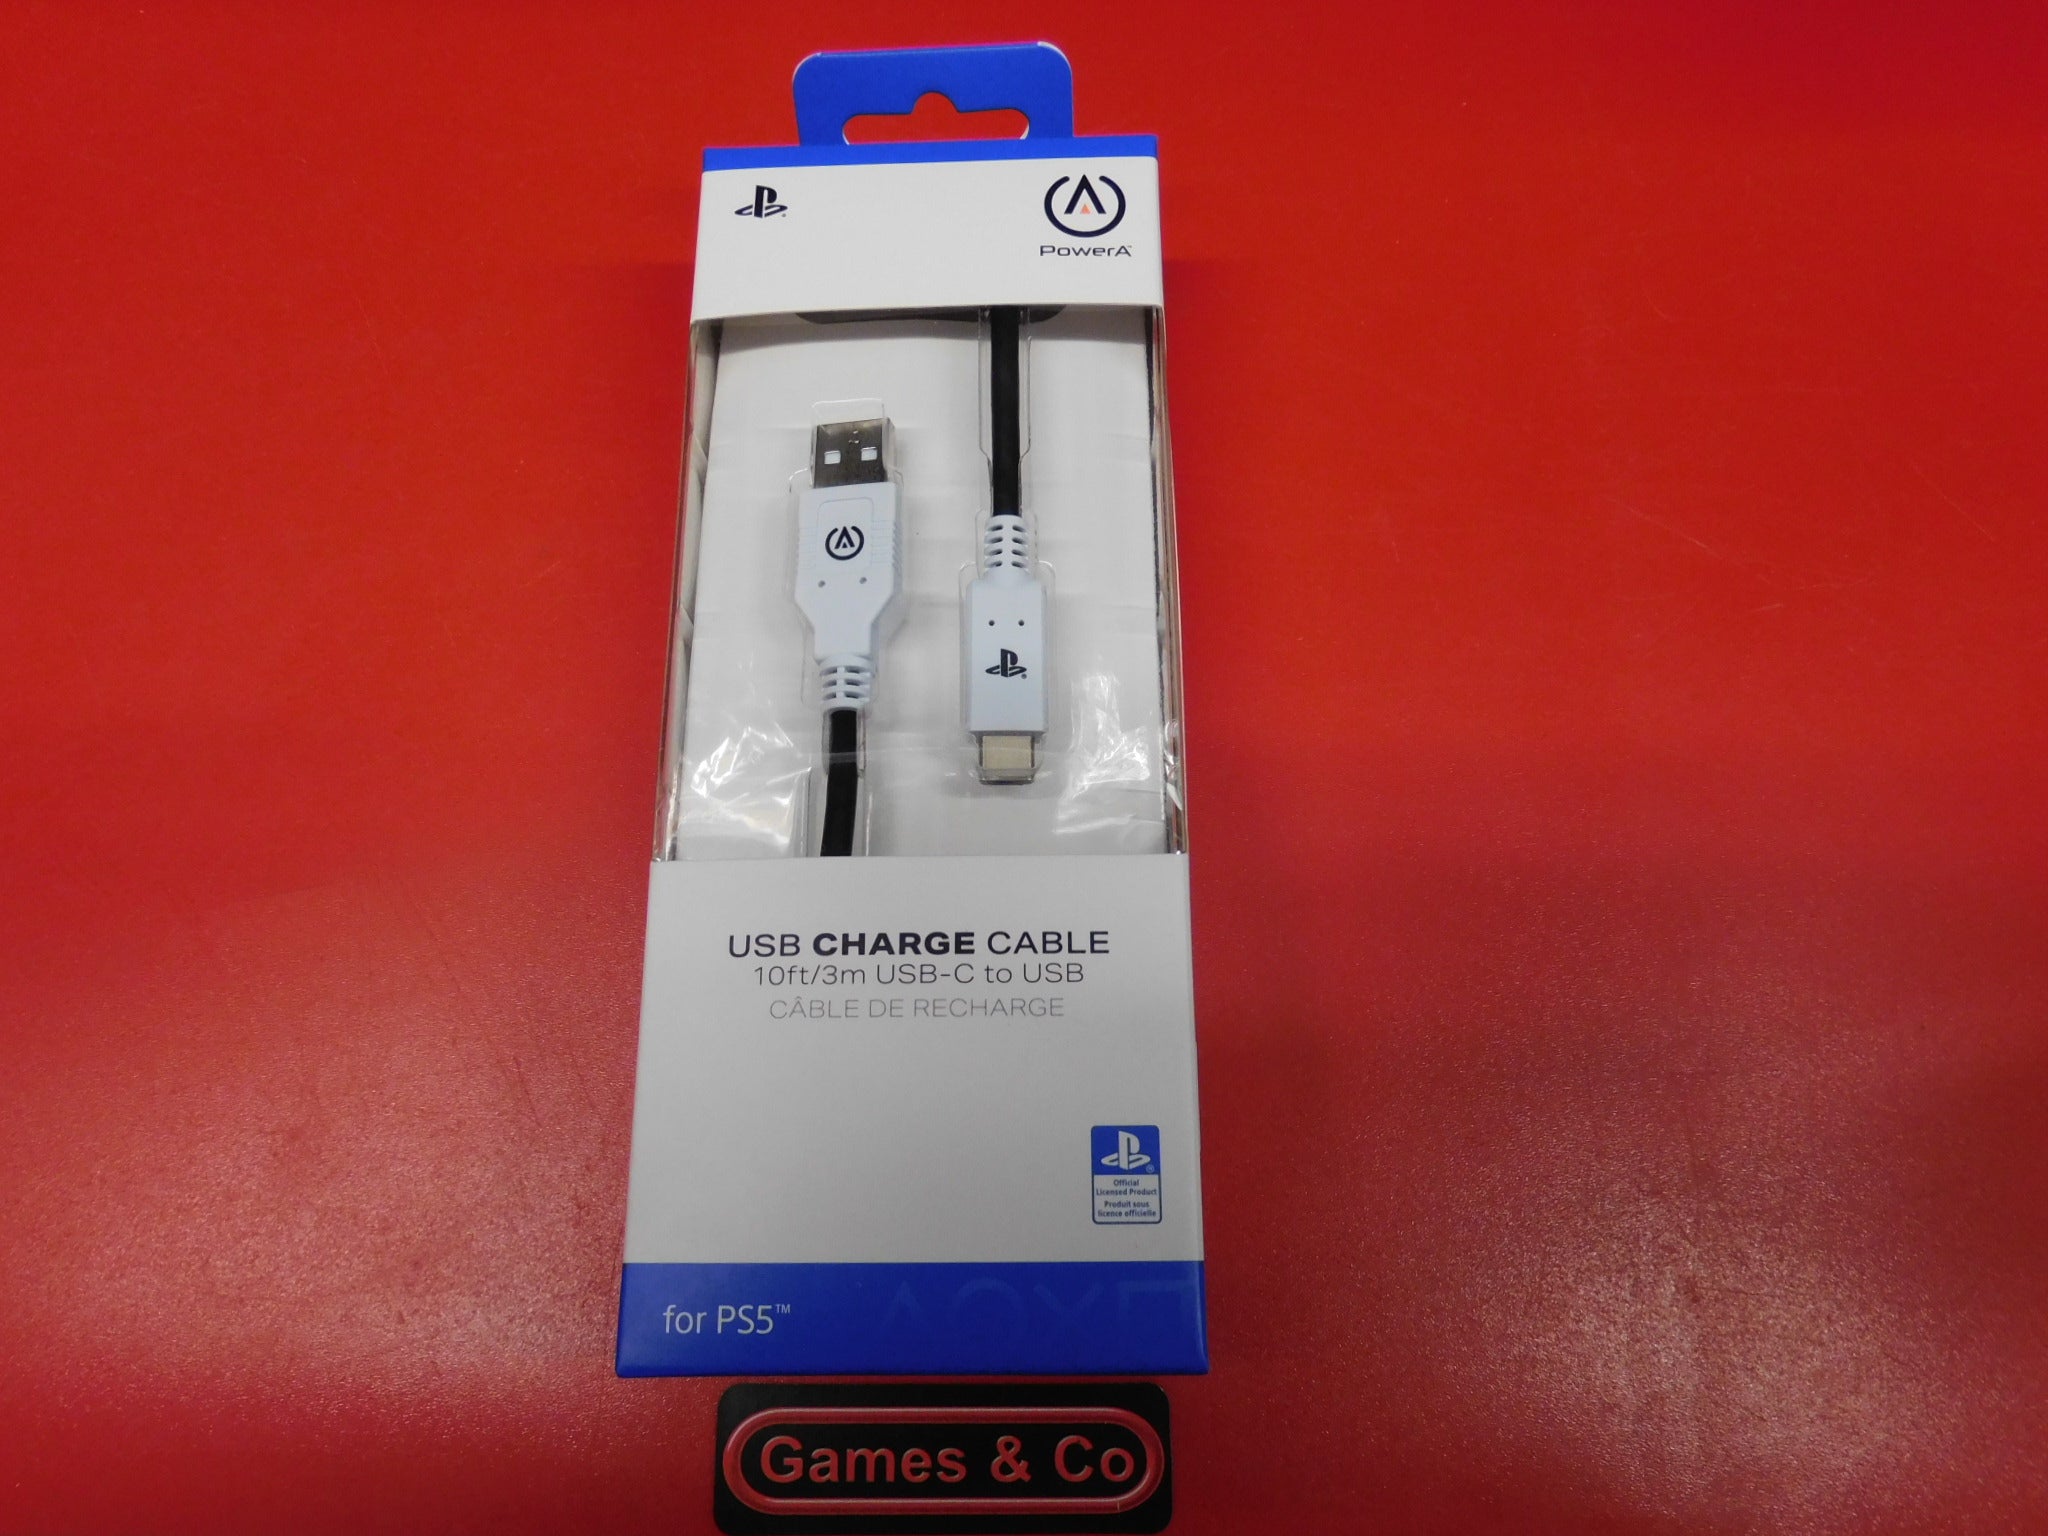 OFFICIAL PLAYSTATION 5 USB CHARGE CABLE 3M